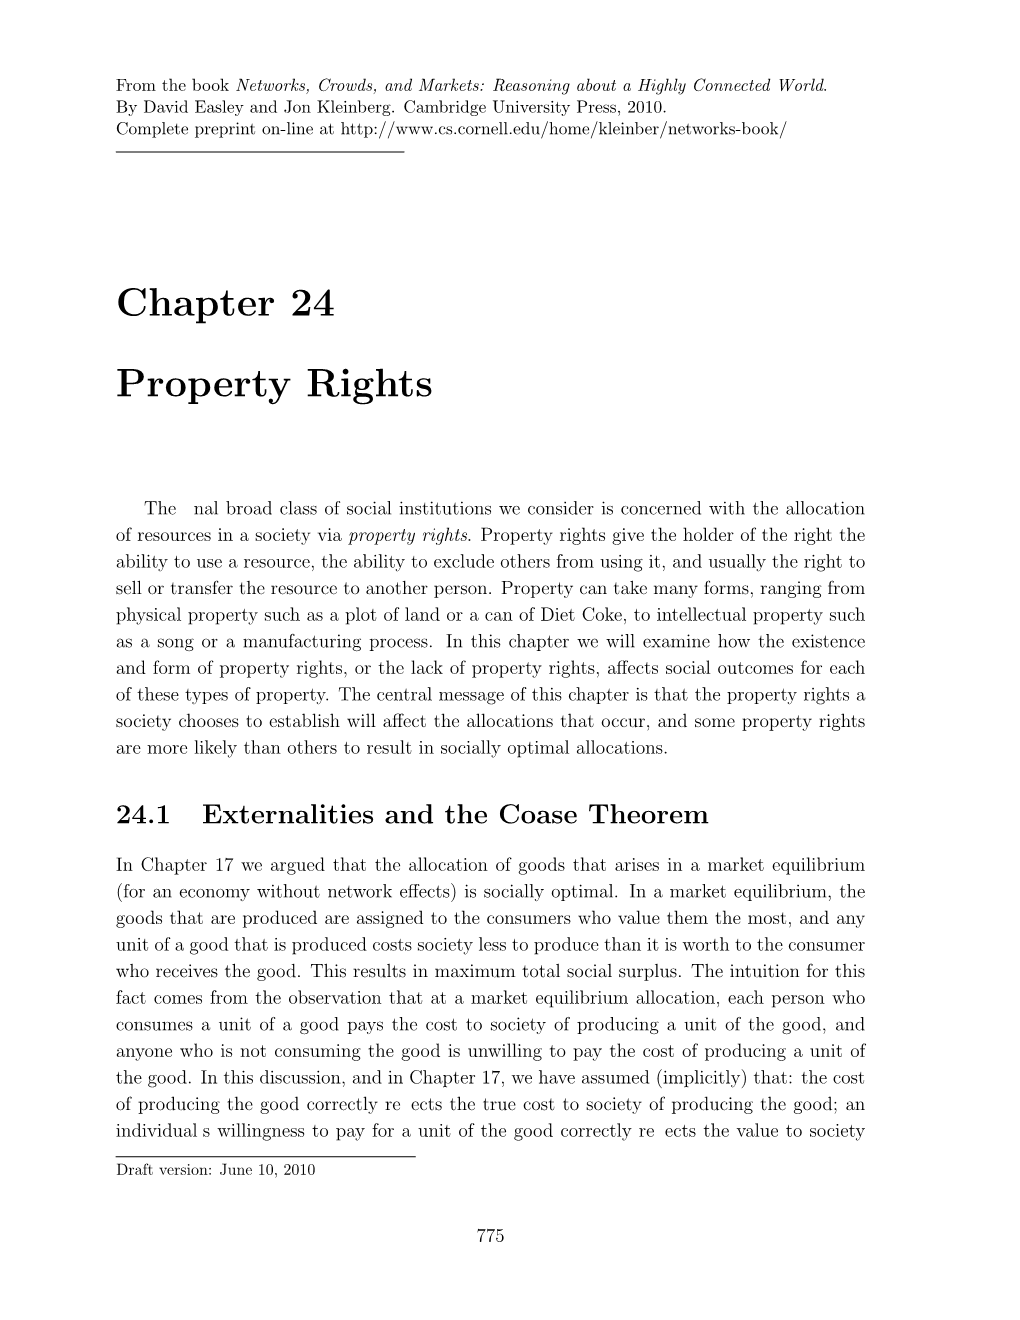 Chapter 24 Property Rights